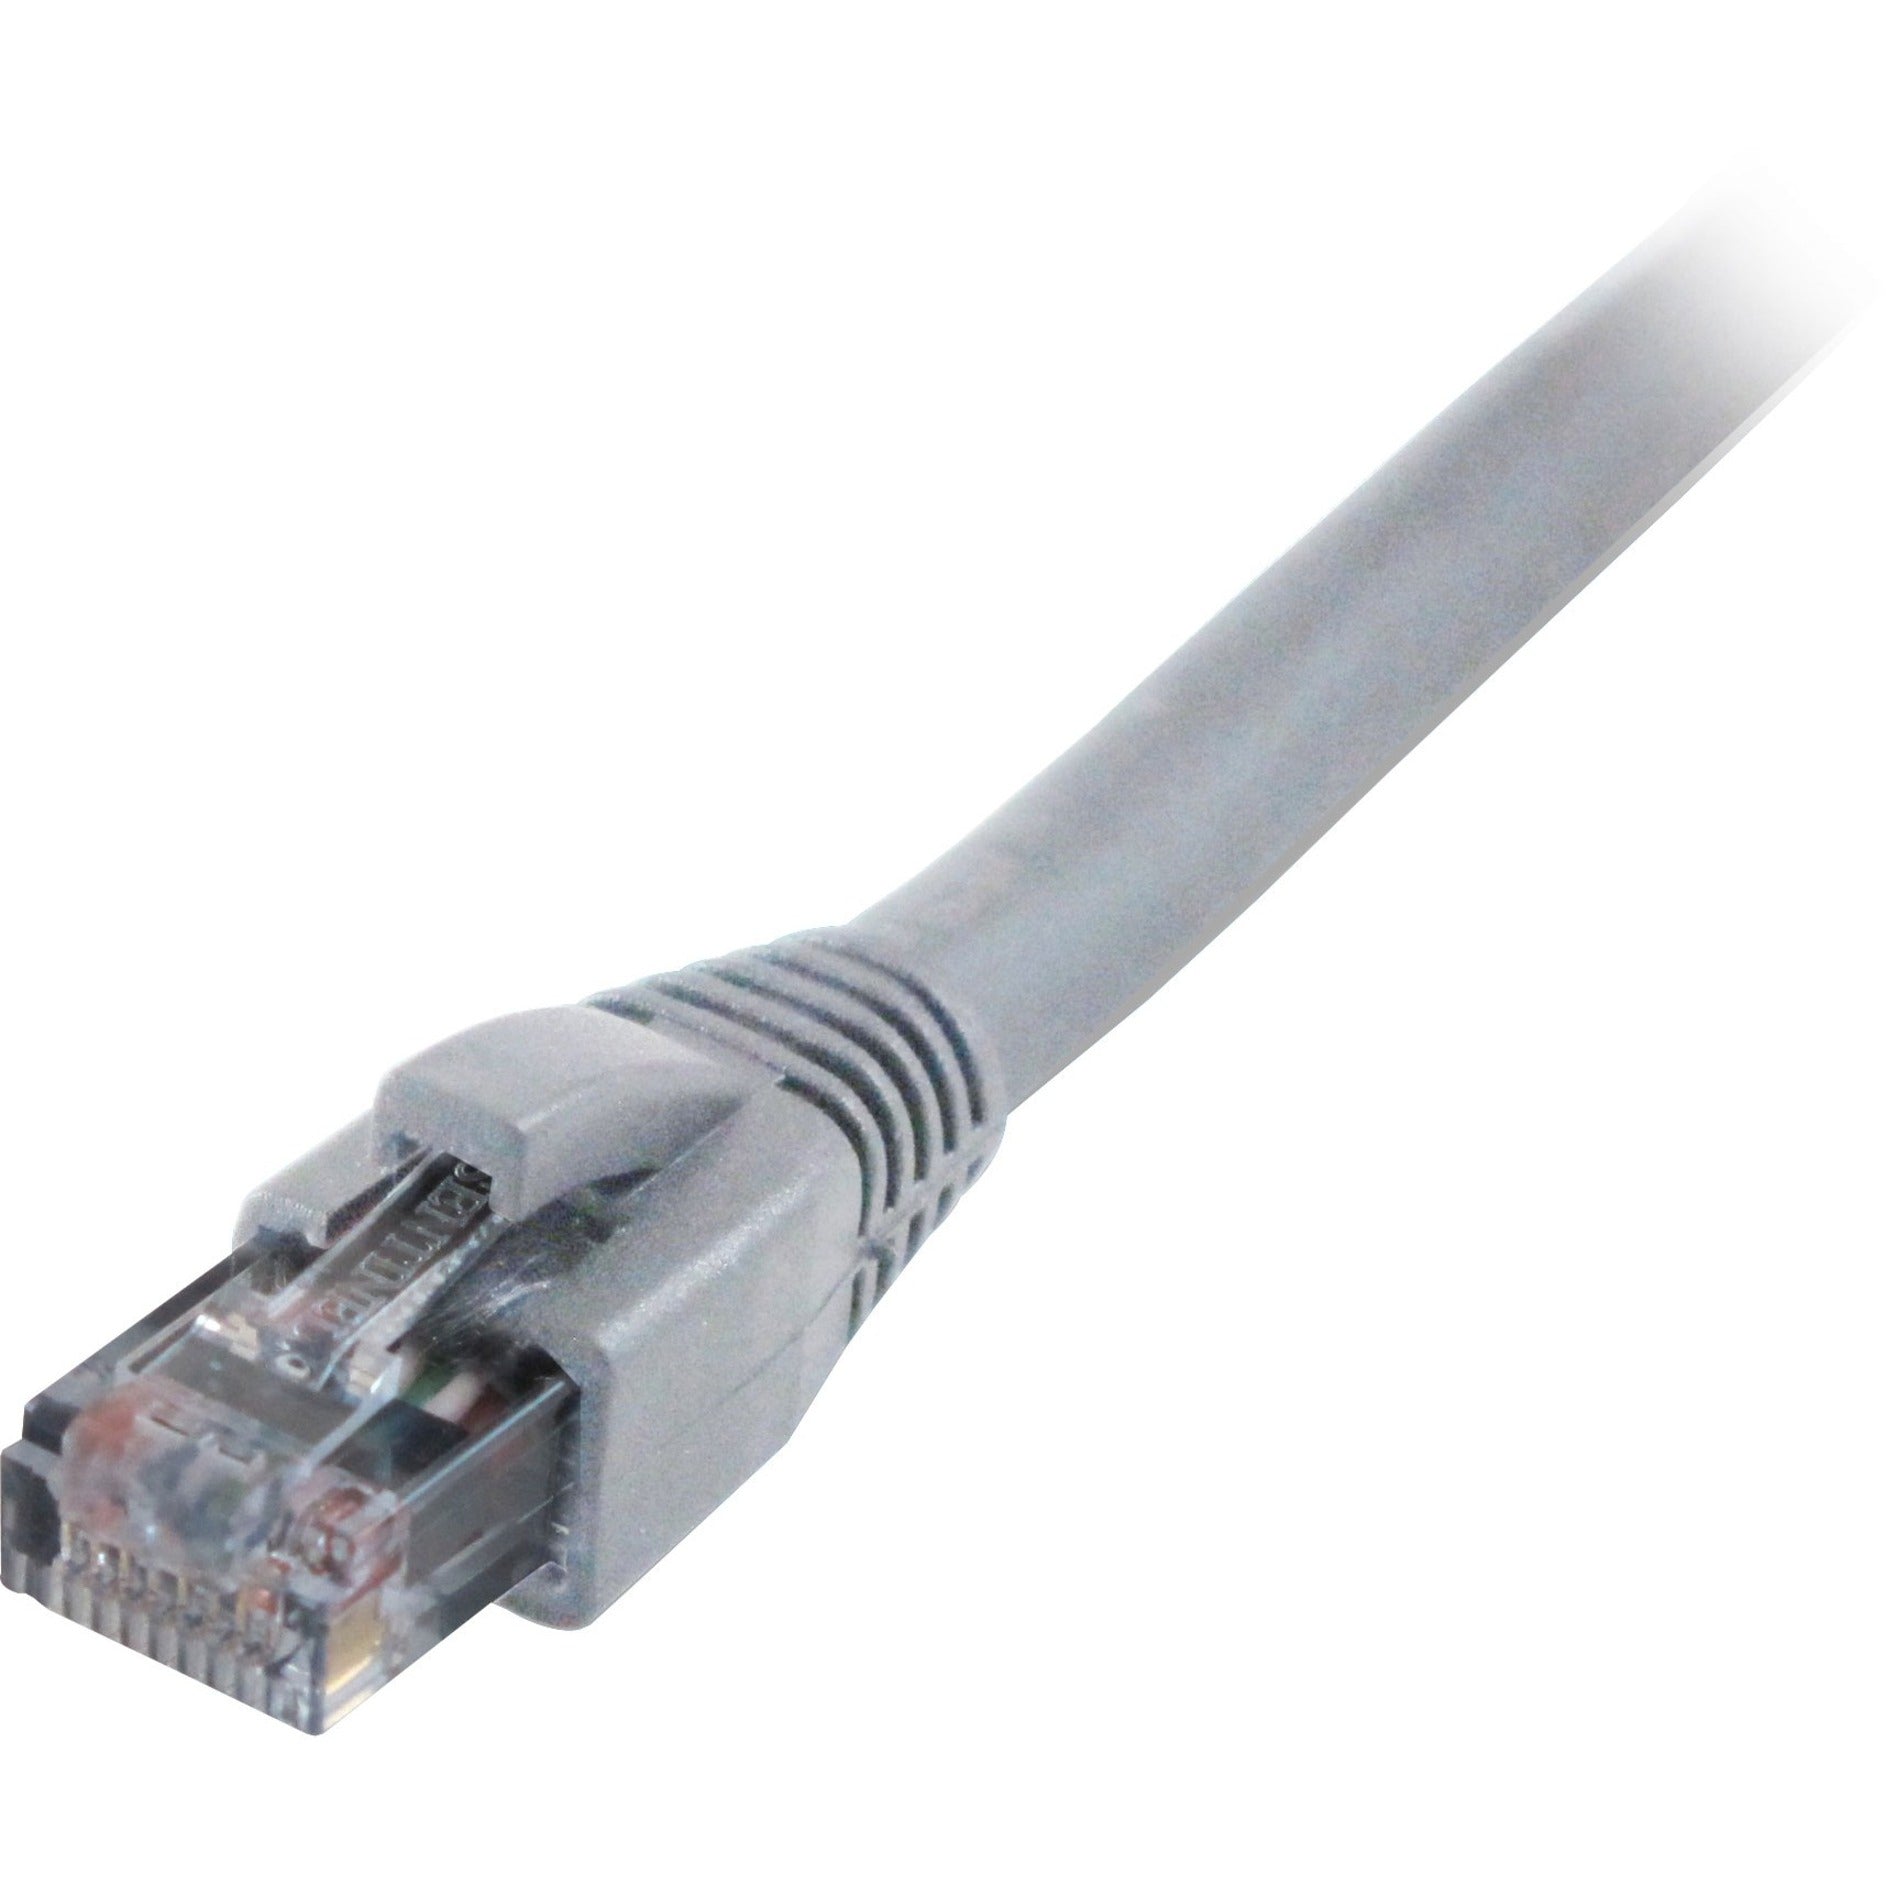 Comprehensive CAT5-350-5GRY Cat5e 350 Mhz Snagless Patch Cable 5ft Gray, Lifetime Warranty, 1 Gbit/s Data Transfer Rate